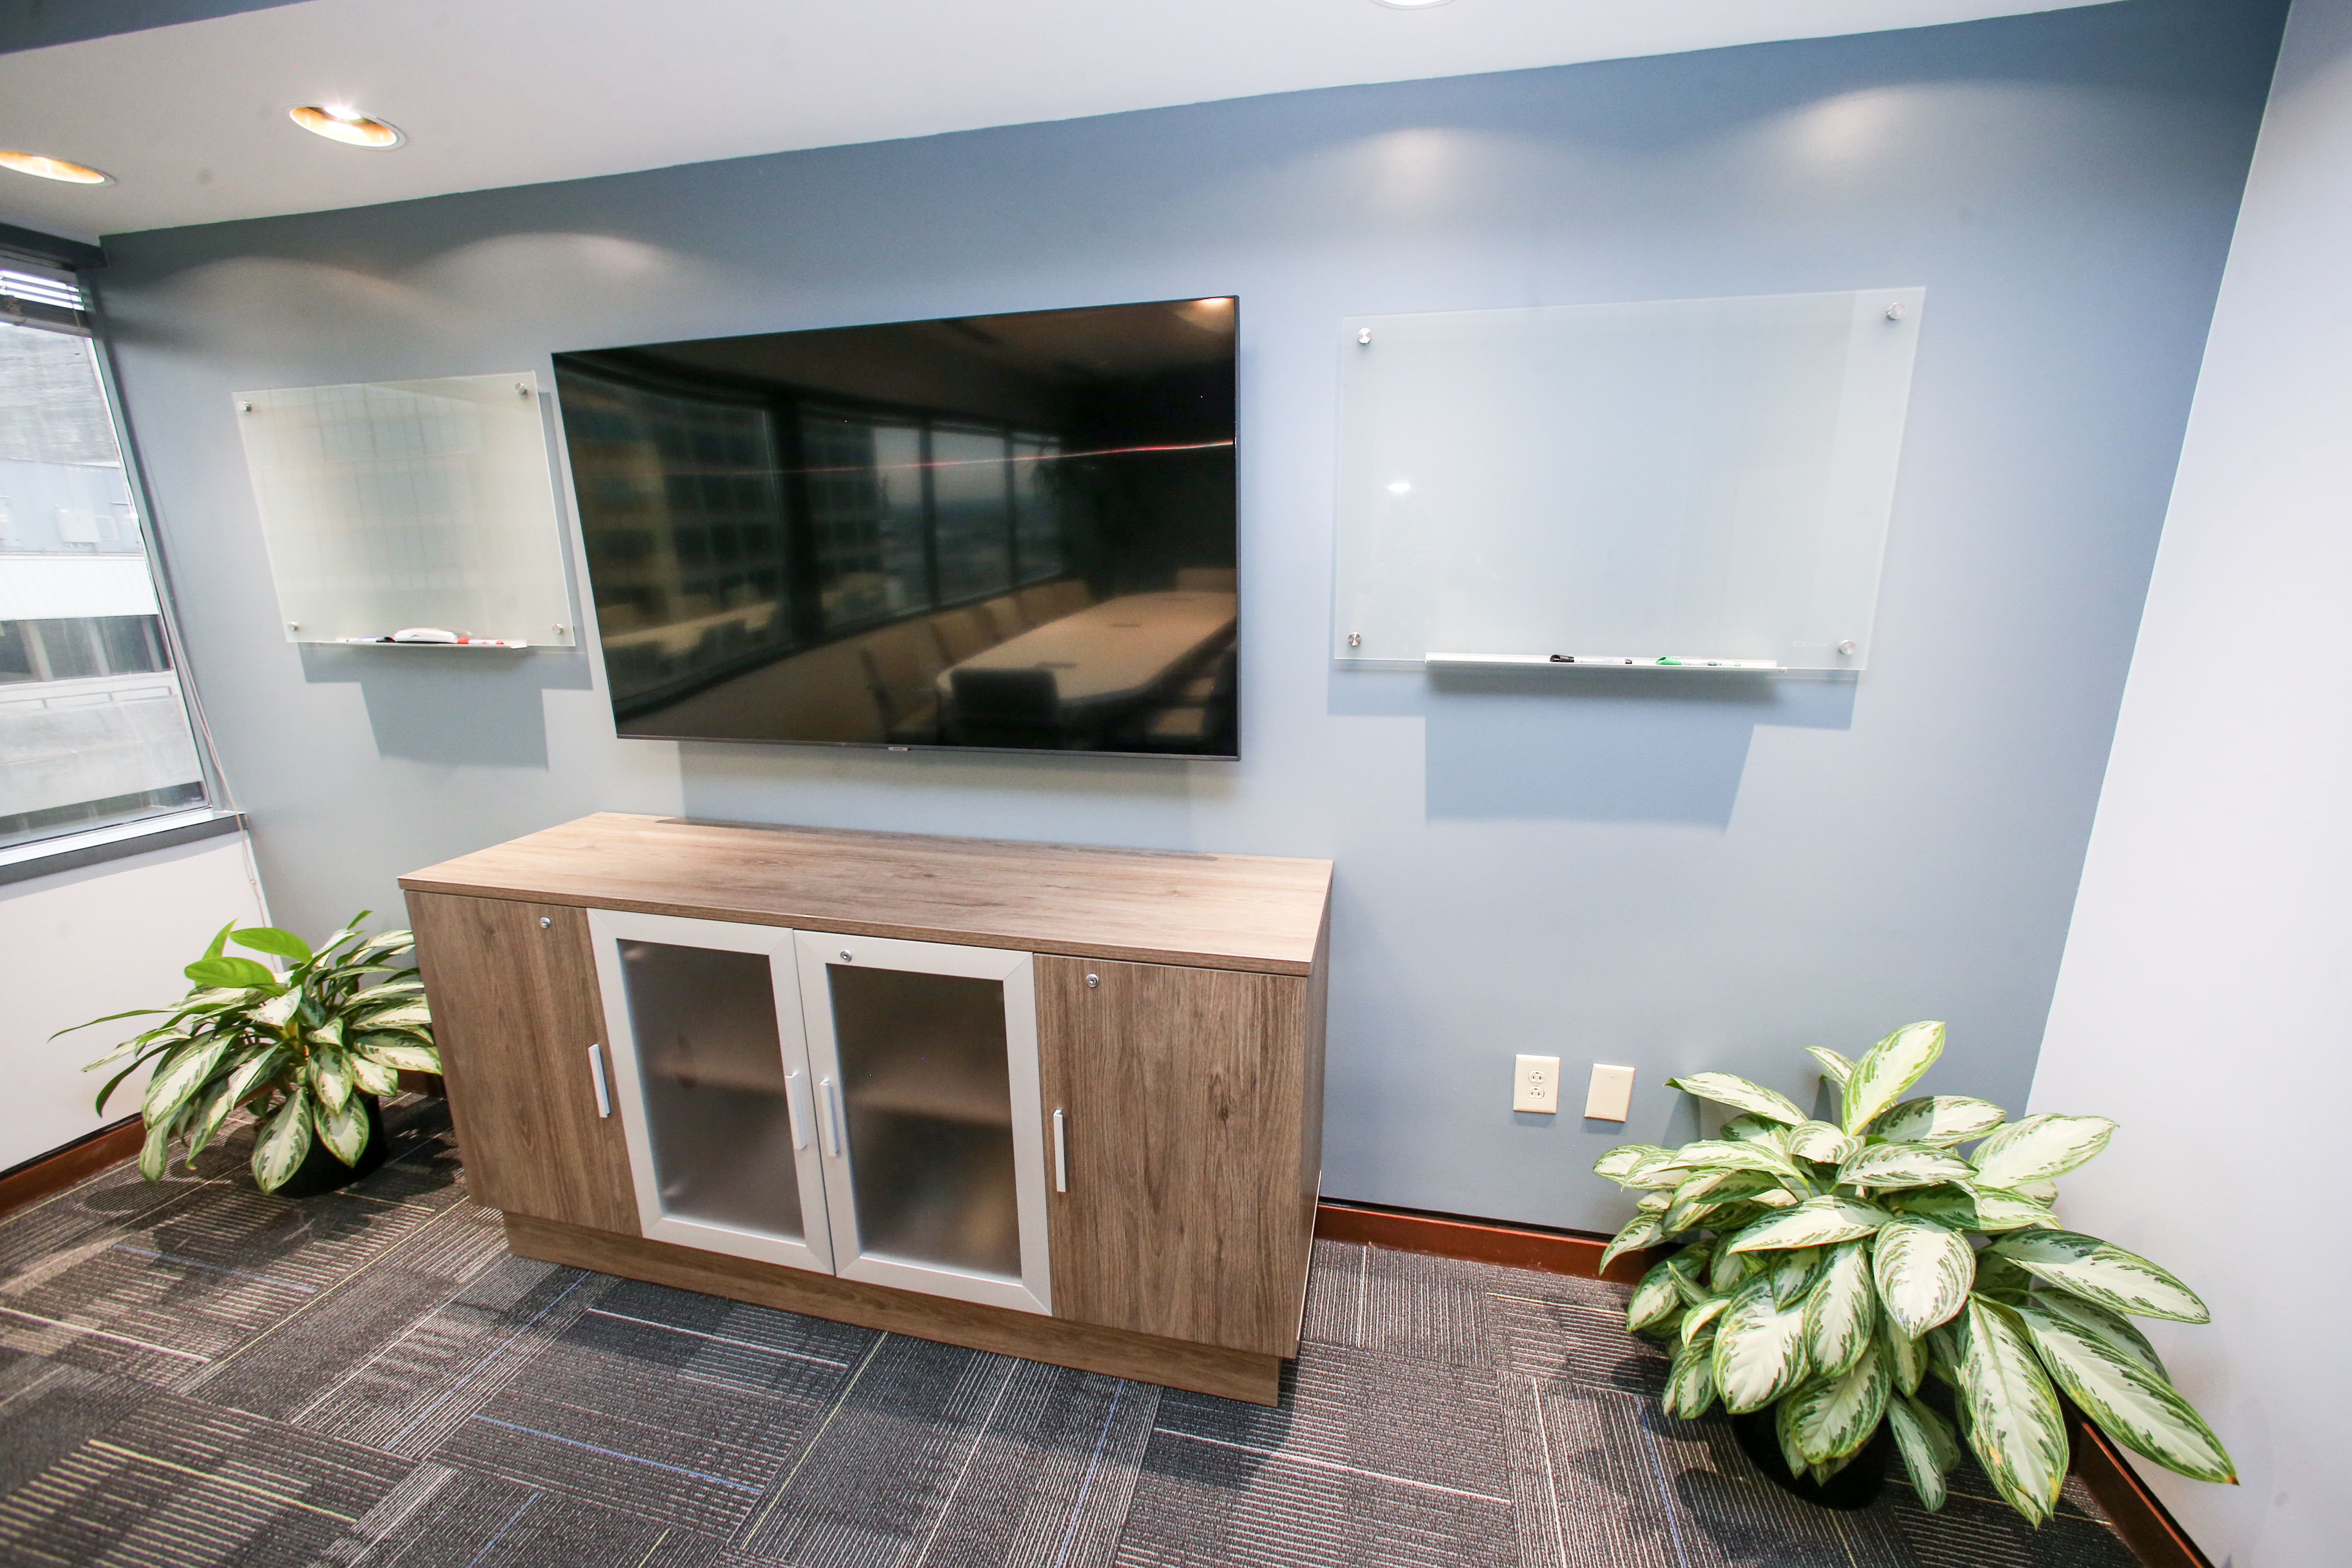 Boardroom television and white boards